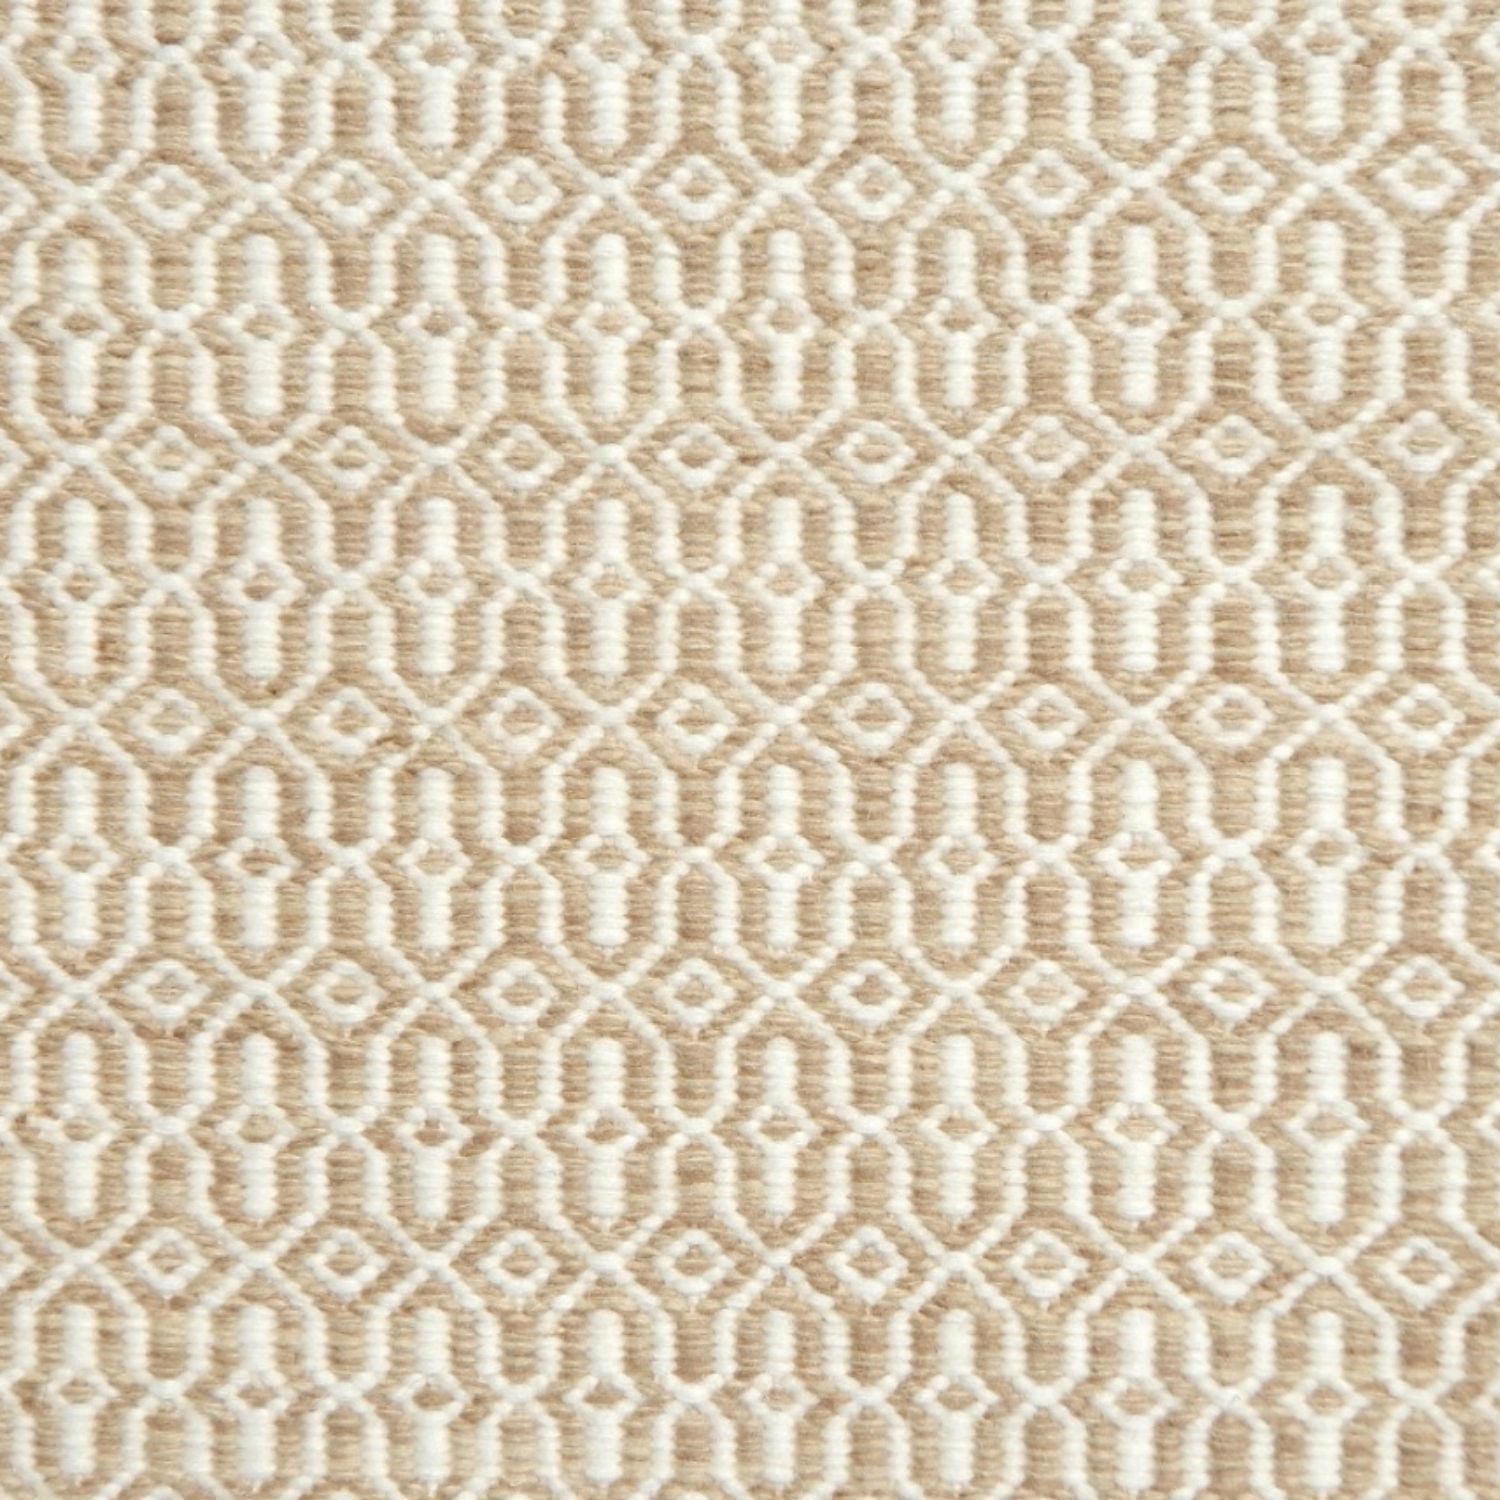 A rug with a woven overall pattern in tan and ivory.